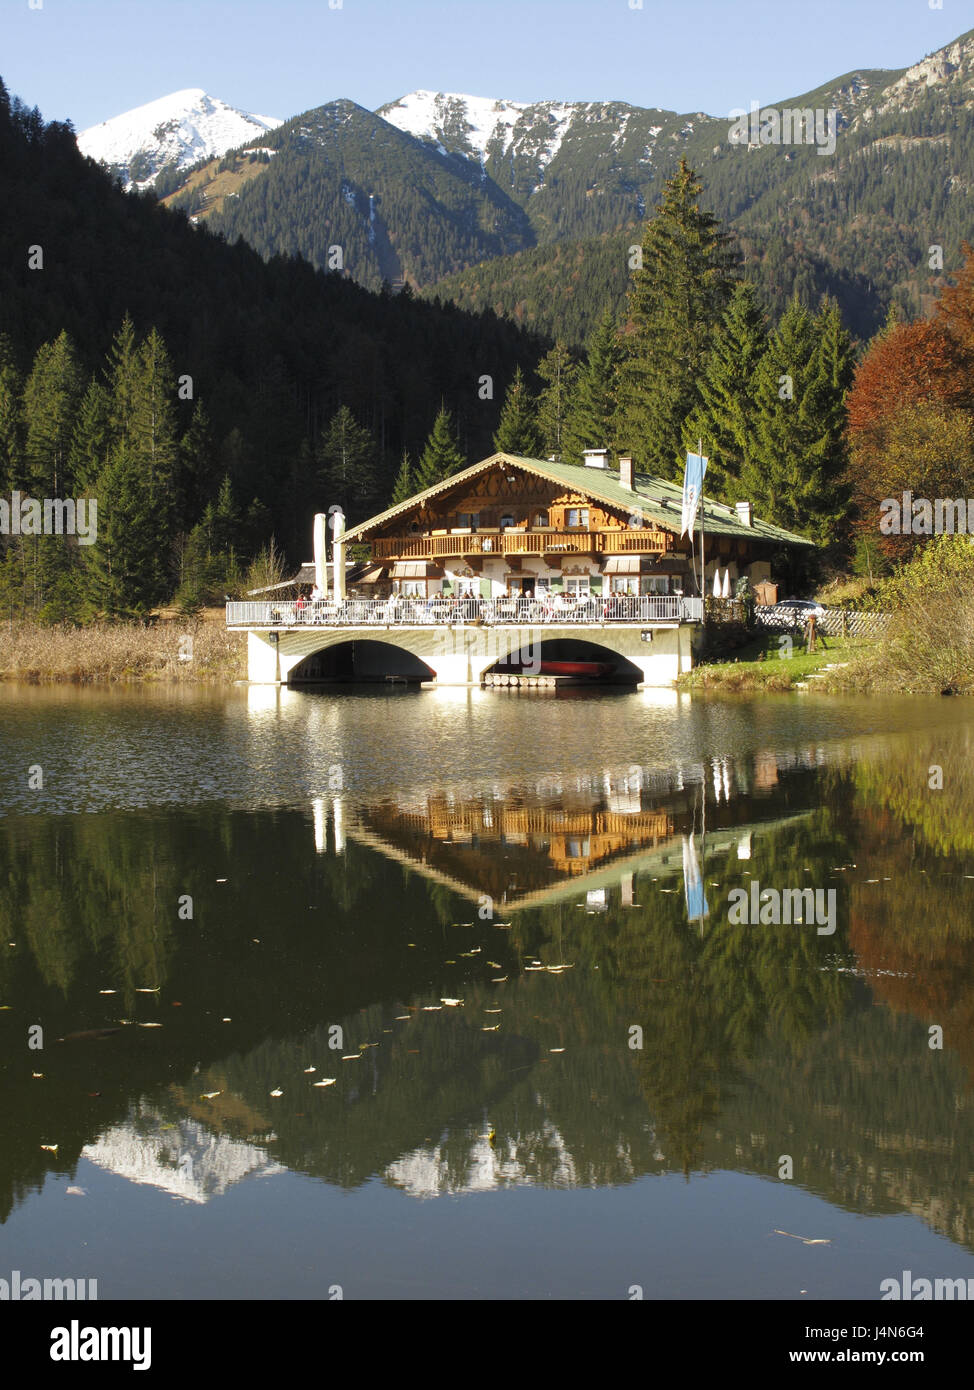 Inn, inn in the orderly's lake with Garmisch-Partenkirchen in the Kramerplateauweg, Upper Bavaria, Germany, architecture, outside, outside view, outside views, outside, outside, outside view, outside views, outside, outsides, trees, trees, tree, structure, structures, in Bavarian, Bavarian, Bavarian, Bavarian, Bavaria, in Bavarian, Bavarian, Bavarian, Bavarian, with, mountain, mountains, mountainous, mountainous, more mountainous, mountainous, mountain landscape, mountain landscapes, mountain lake, mountain lakes, the FRG, the federal republic, in German, German, more in German, German, Stock Photo